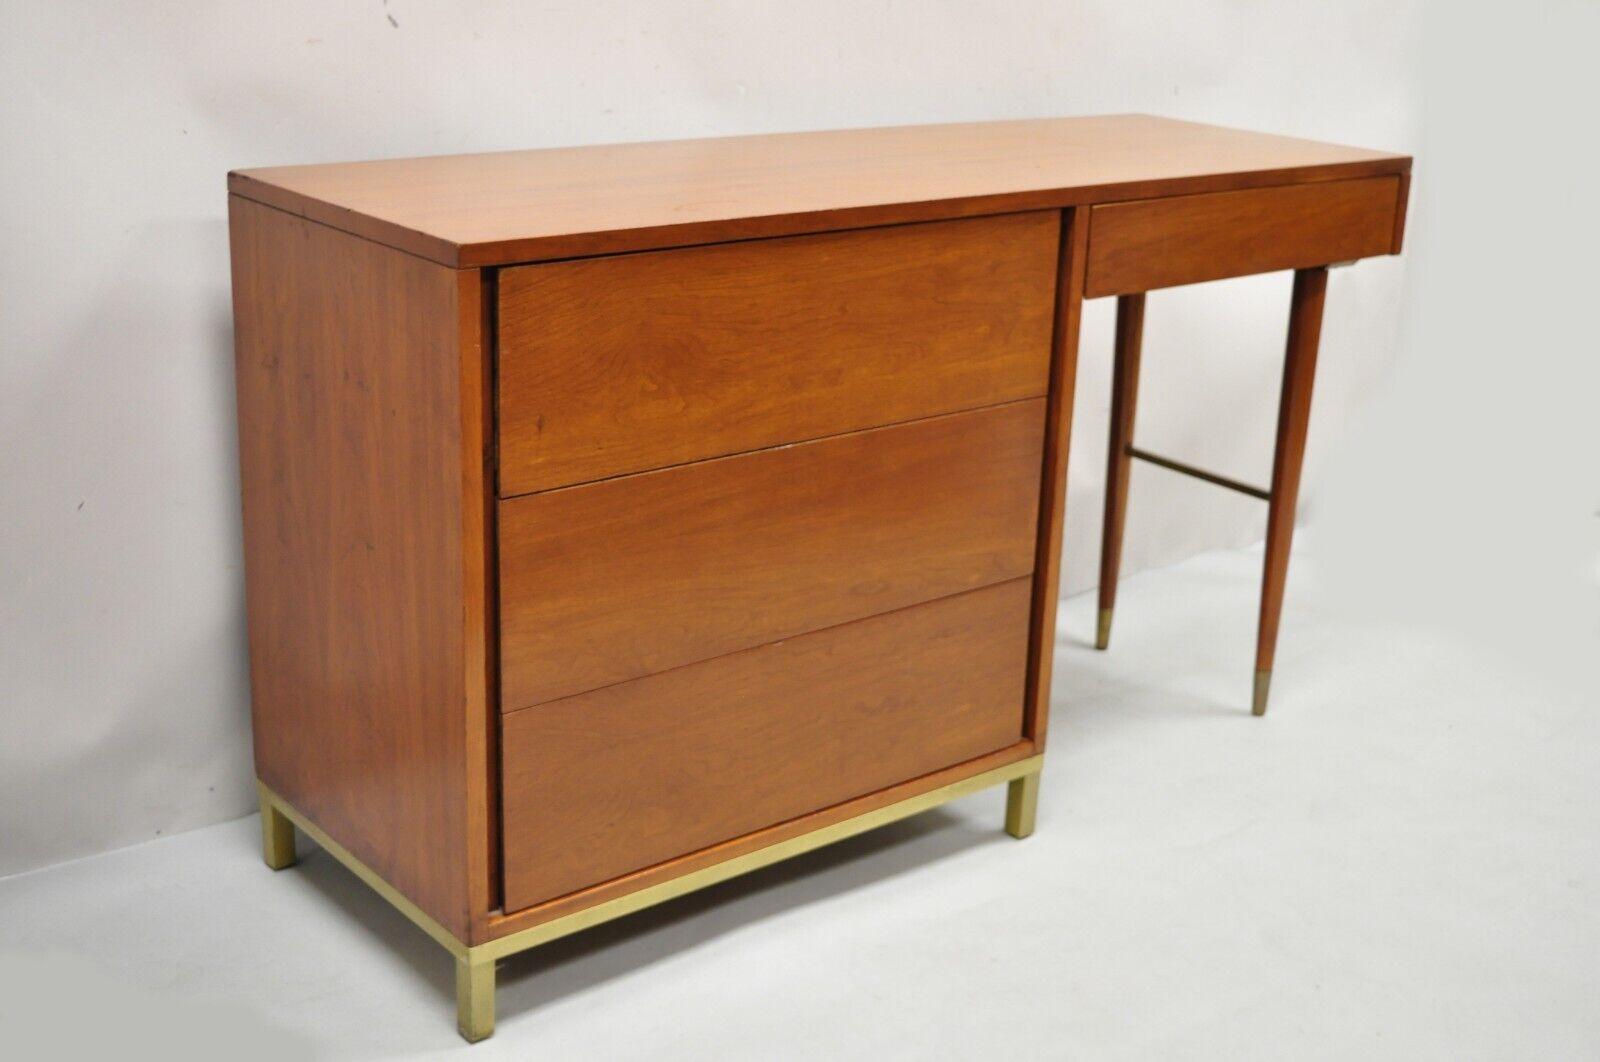 Mid-Century Modern brass legs and base walnut kneehole writing desk modernist. Item features unique brass base and stretcher support, beautiful wood grain, 4 dovetailed drawers, tapered legs, clean modernist lines, great style and form. Circa mid